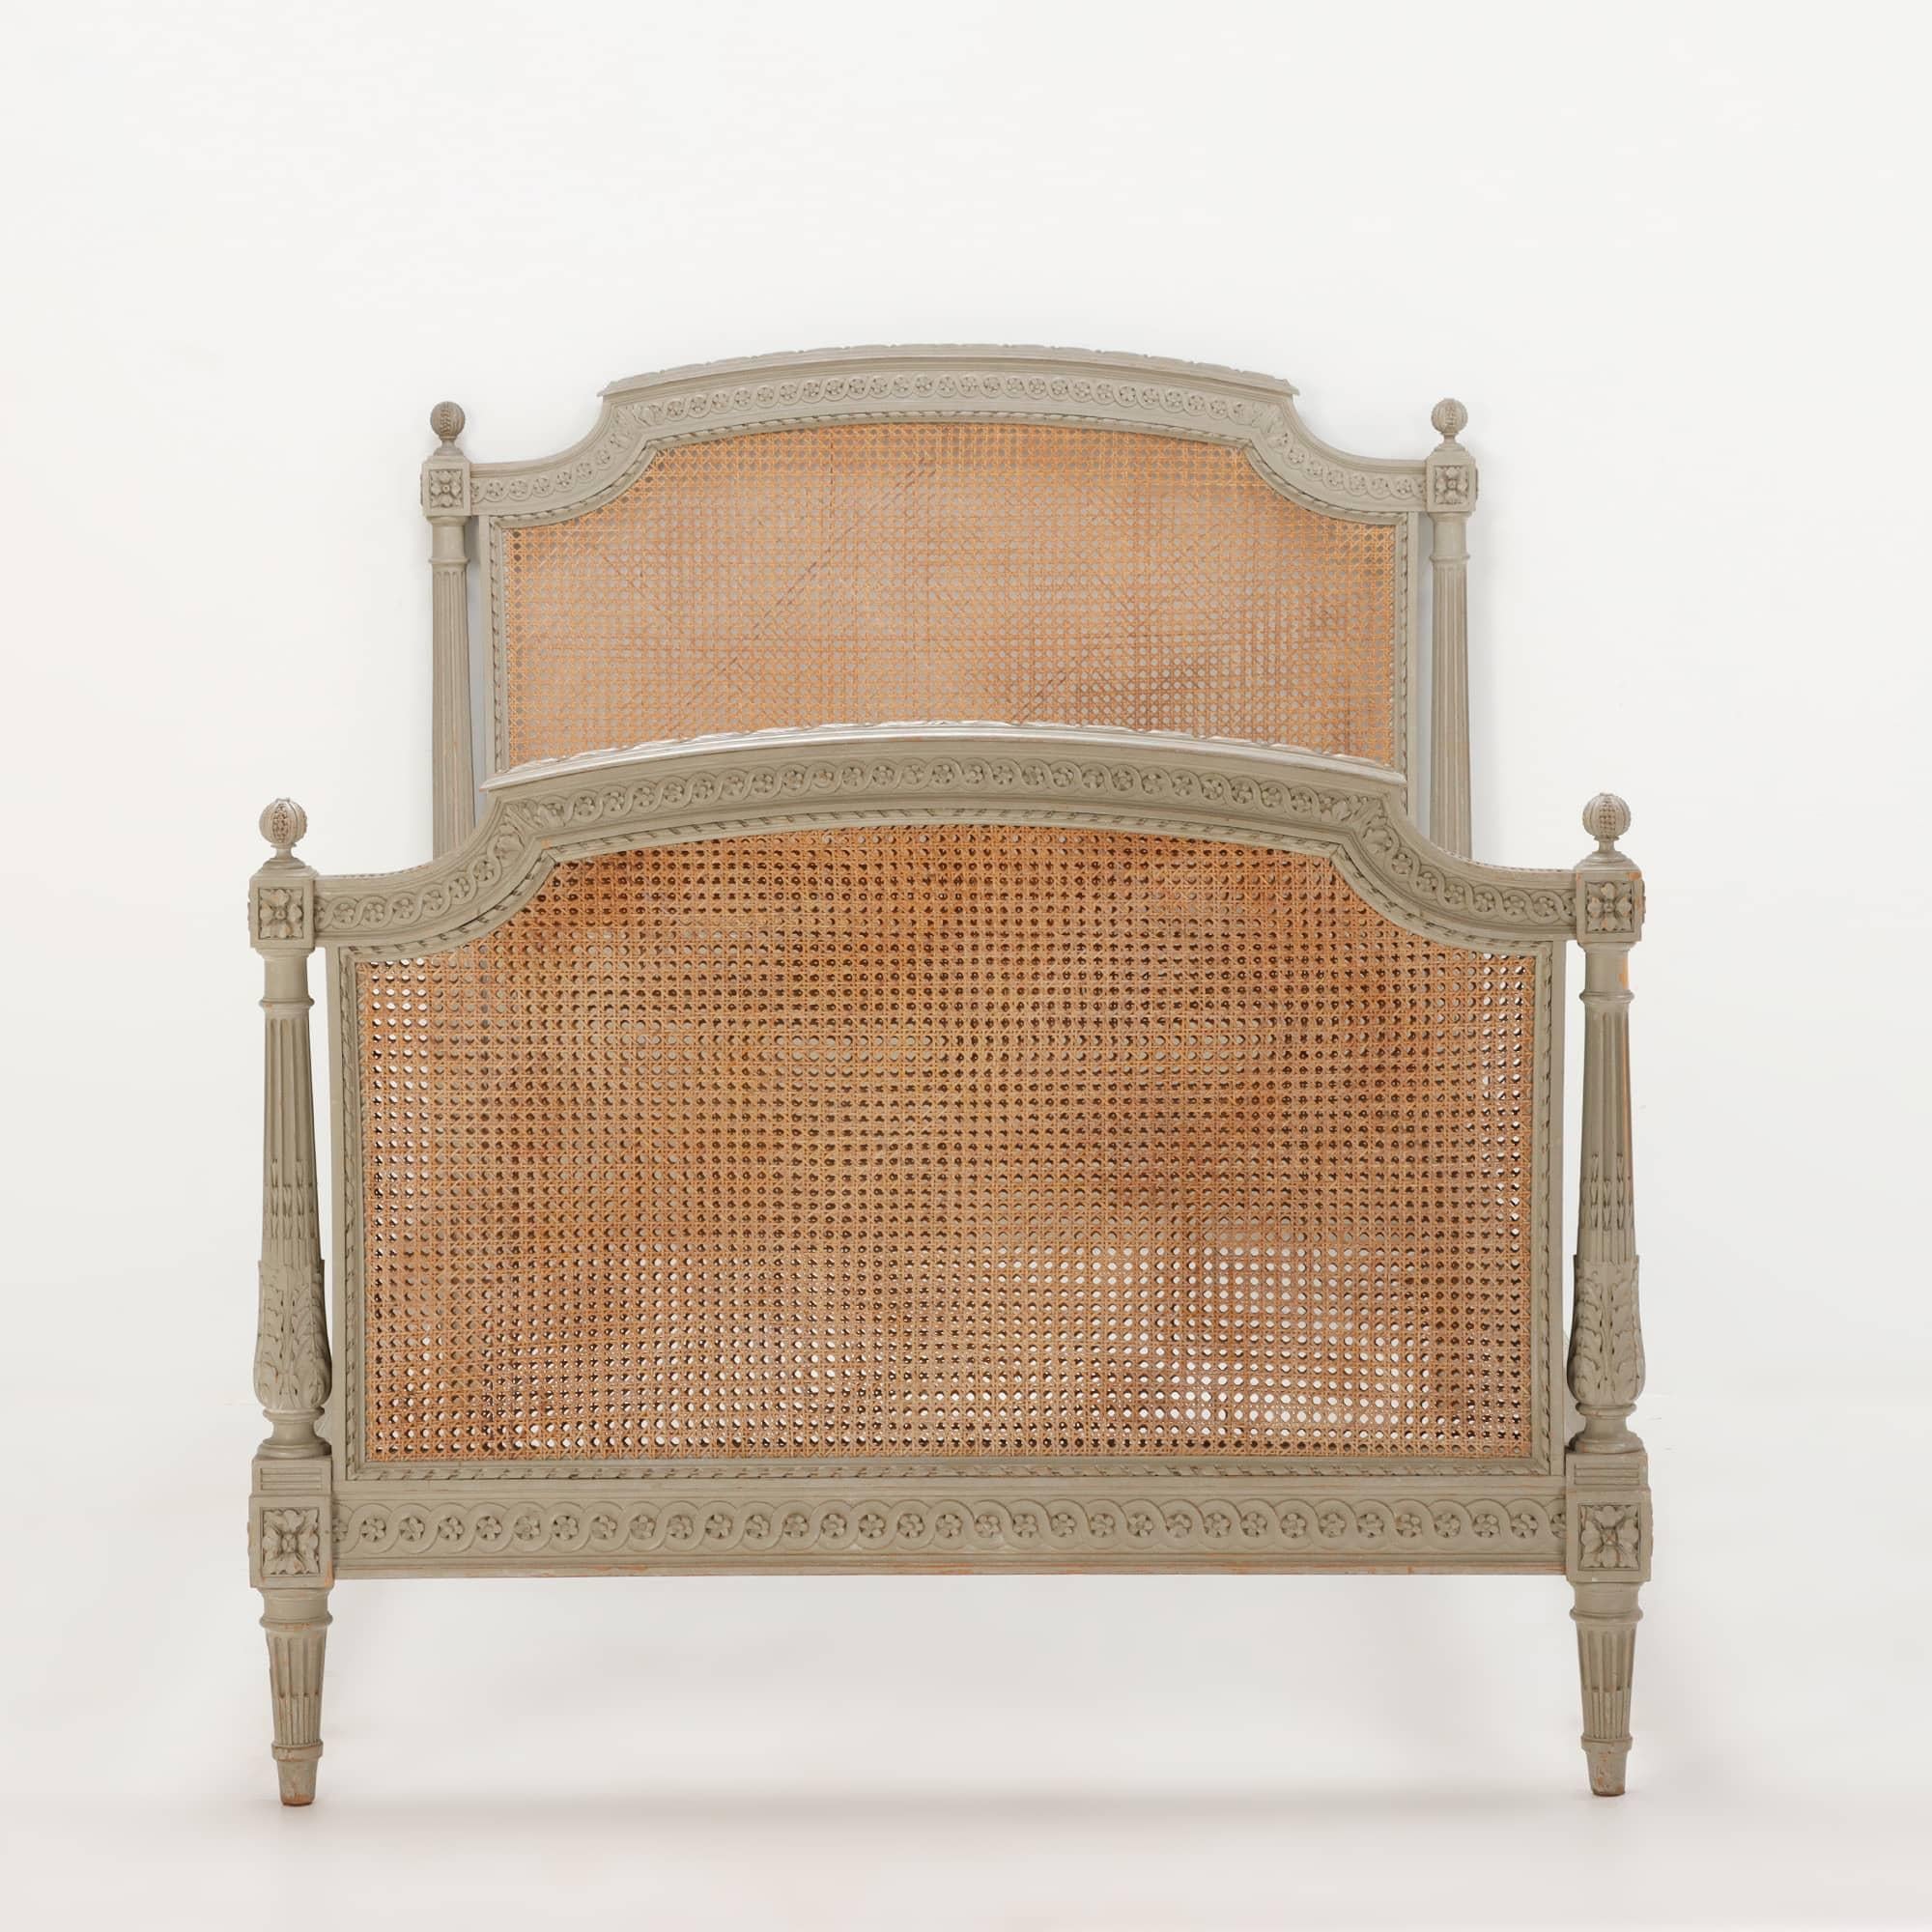 Painted French Louis XVI style carved wood and cane youth or twin size bed C 1930. This bed has a cane headboard and double caned footboard. The photos speak for themselves as it is a beauty. The size is slightly larger than the typical twin bed so